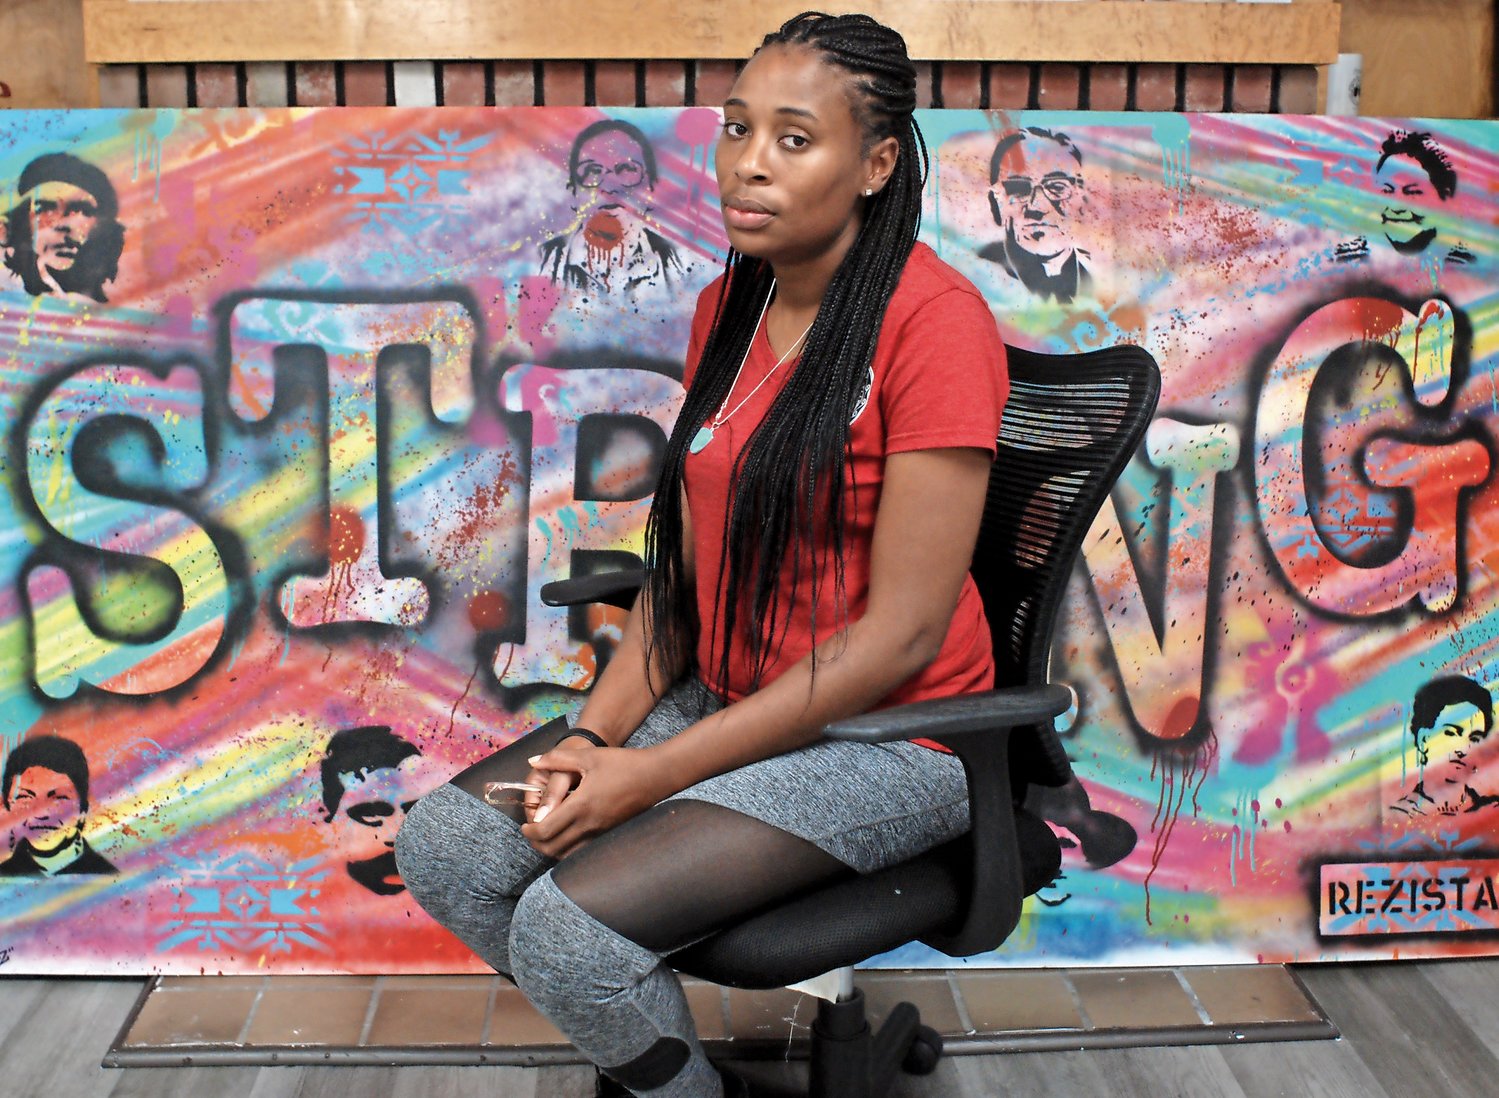 Sharelle Allen, 31, pictured at STRONG Youth in Uniondale, where she is a case manager, said she believes her severe pain when she gave birth suddenly to her second child in 2017 was ignored by her nurse and midwife. According to experts, medical professionals often overlook pain felt by African-American patients, believing that black people have a higher tolerance for pain than white people. Implicit bias and racism in the medical field help explain the disparity in the infant mortality rate between communities of color and white communities, experts say.